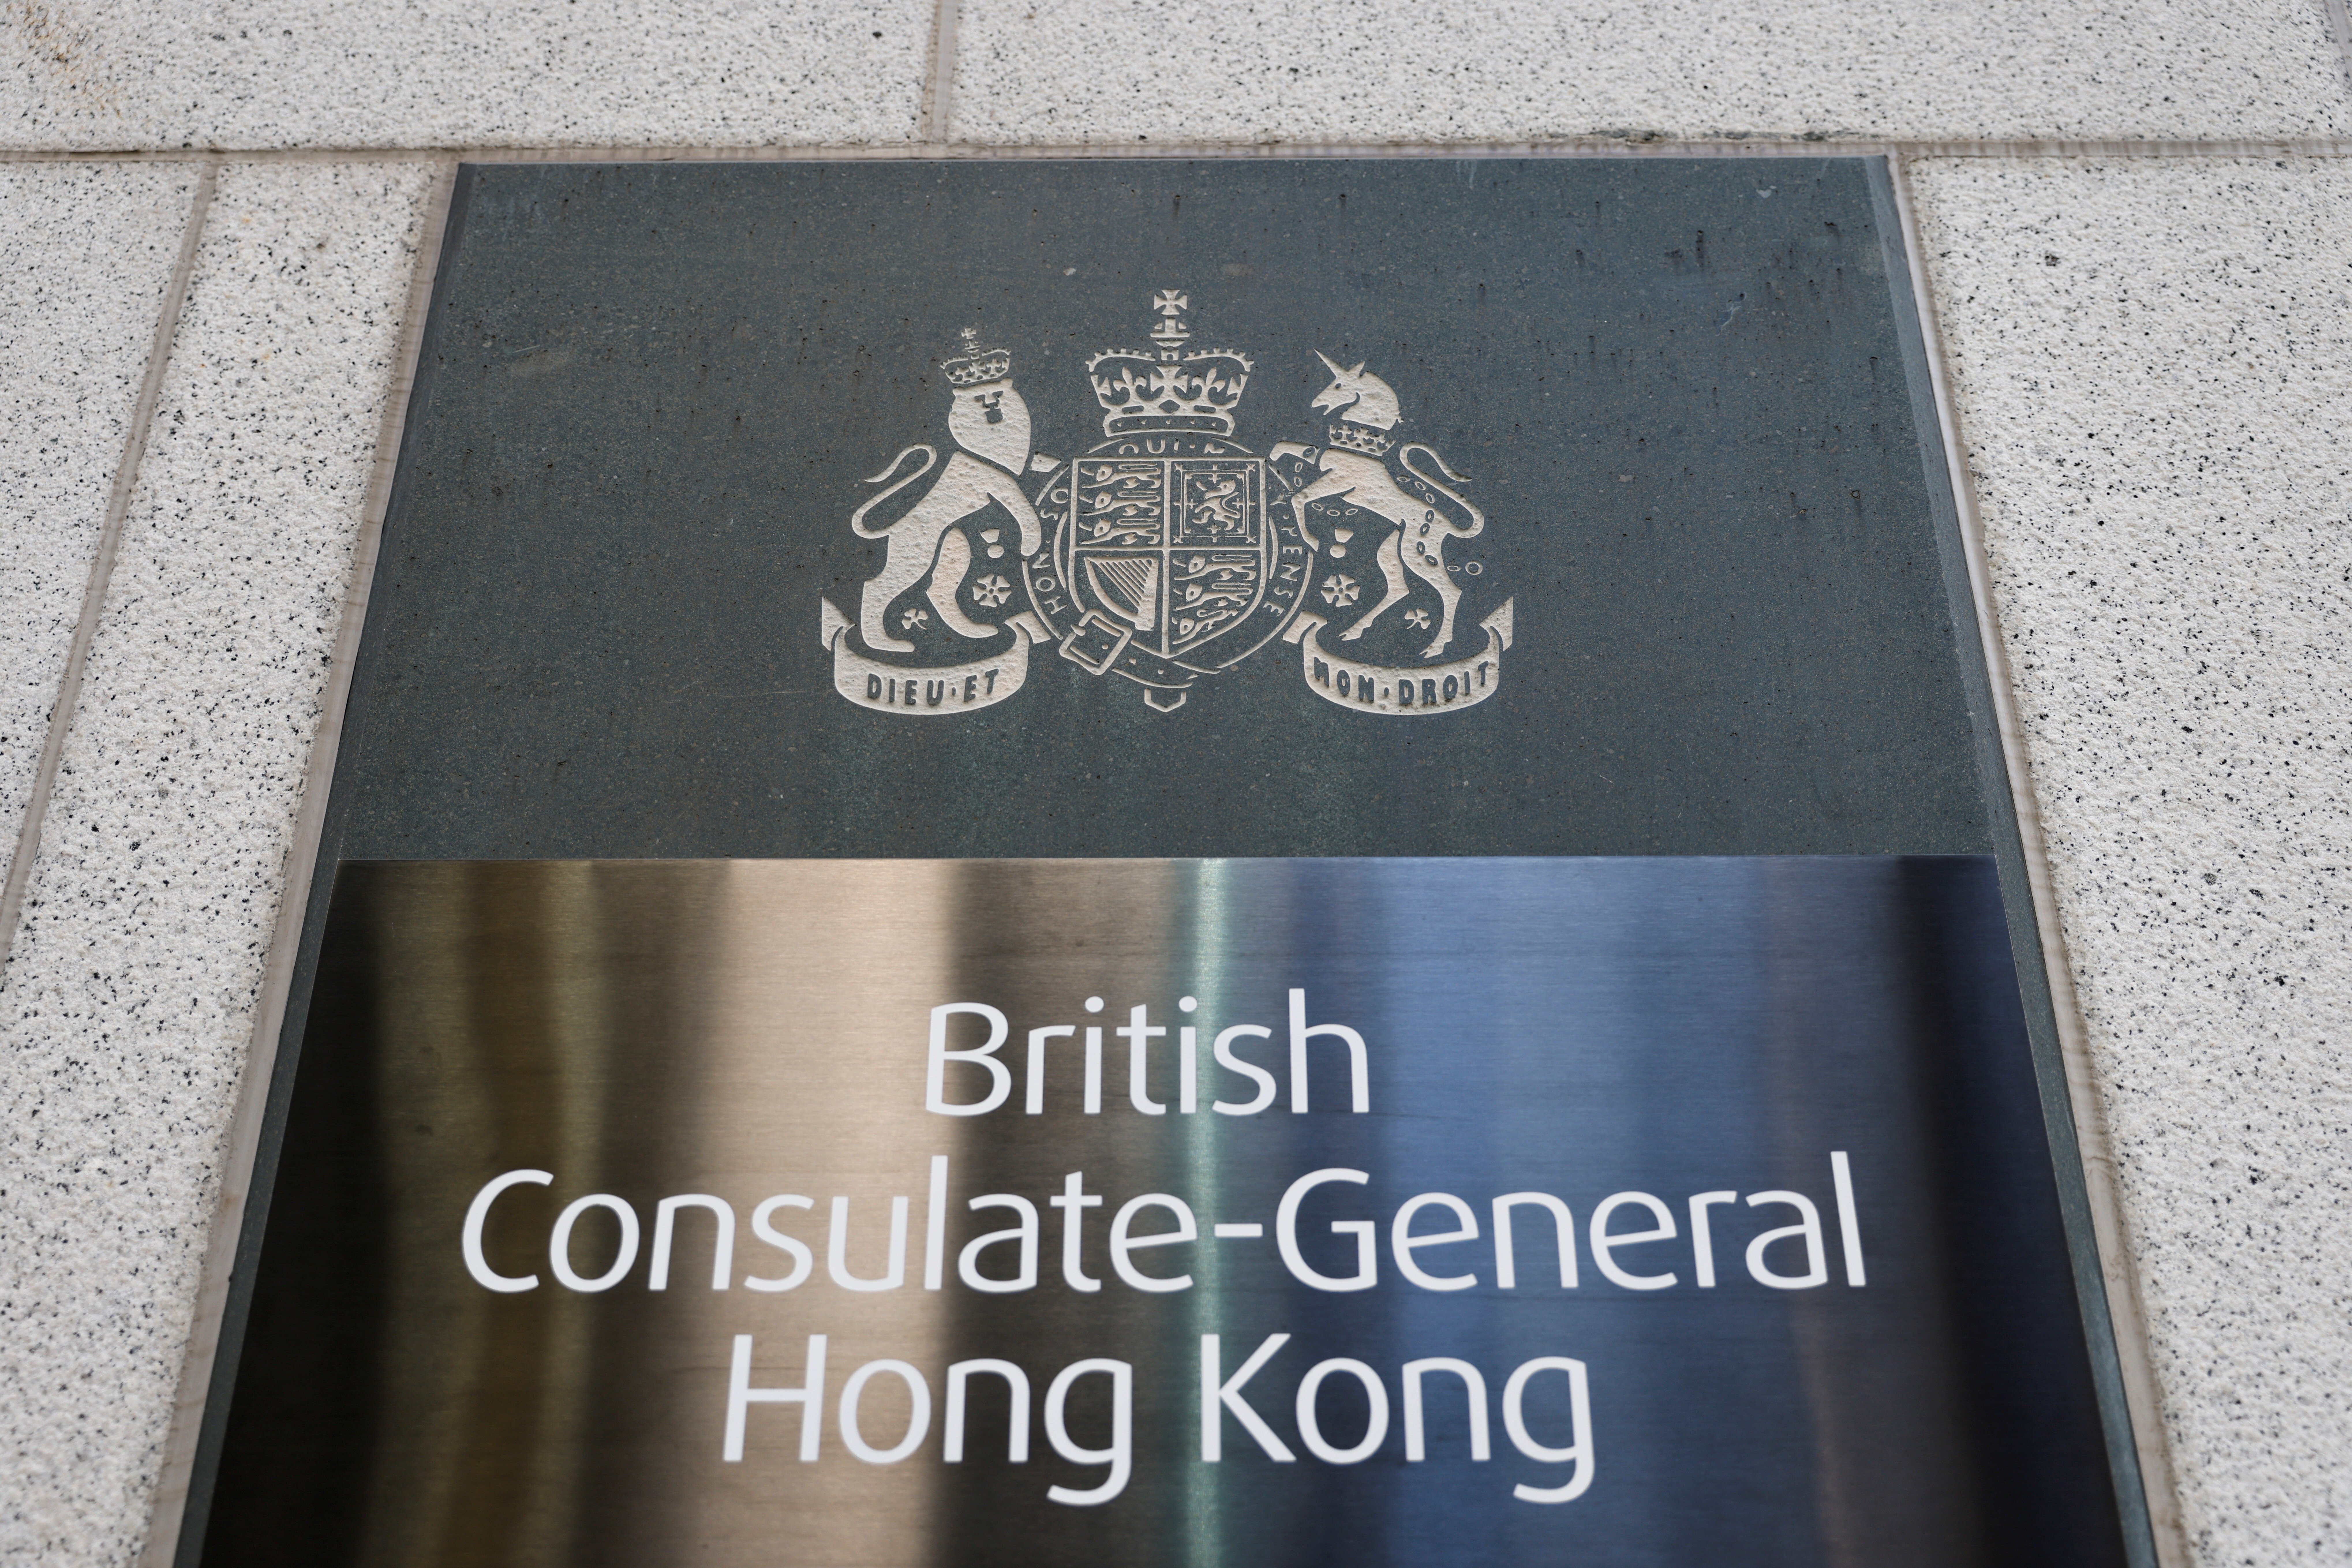 At least four British nationals under detention in Hong Kong have allegedly been mistreated or tortured since 2019. Photo: Reuters